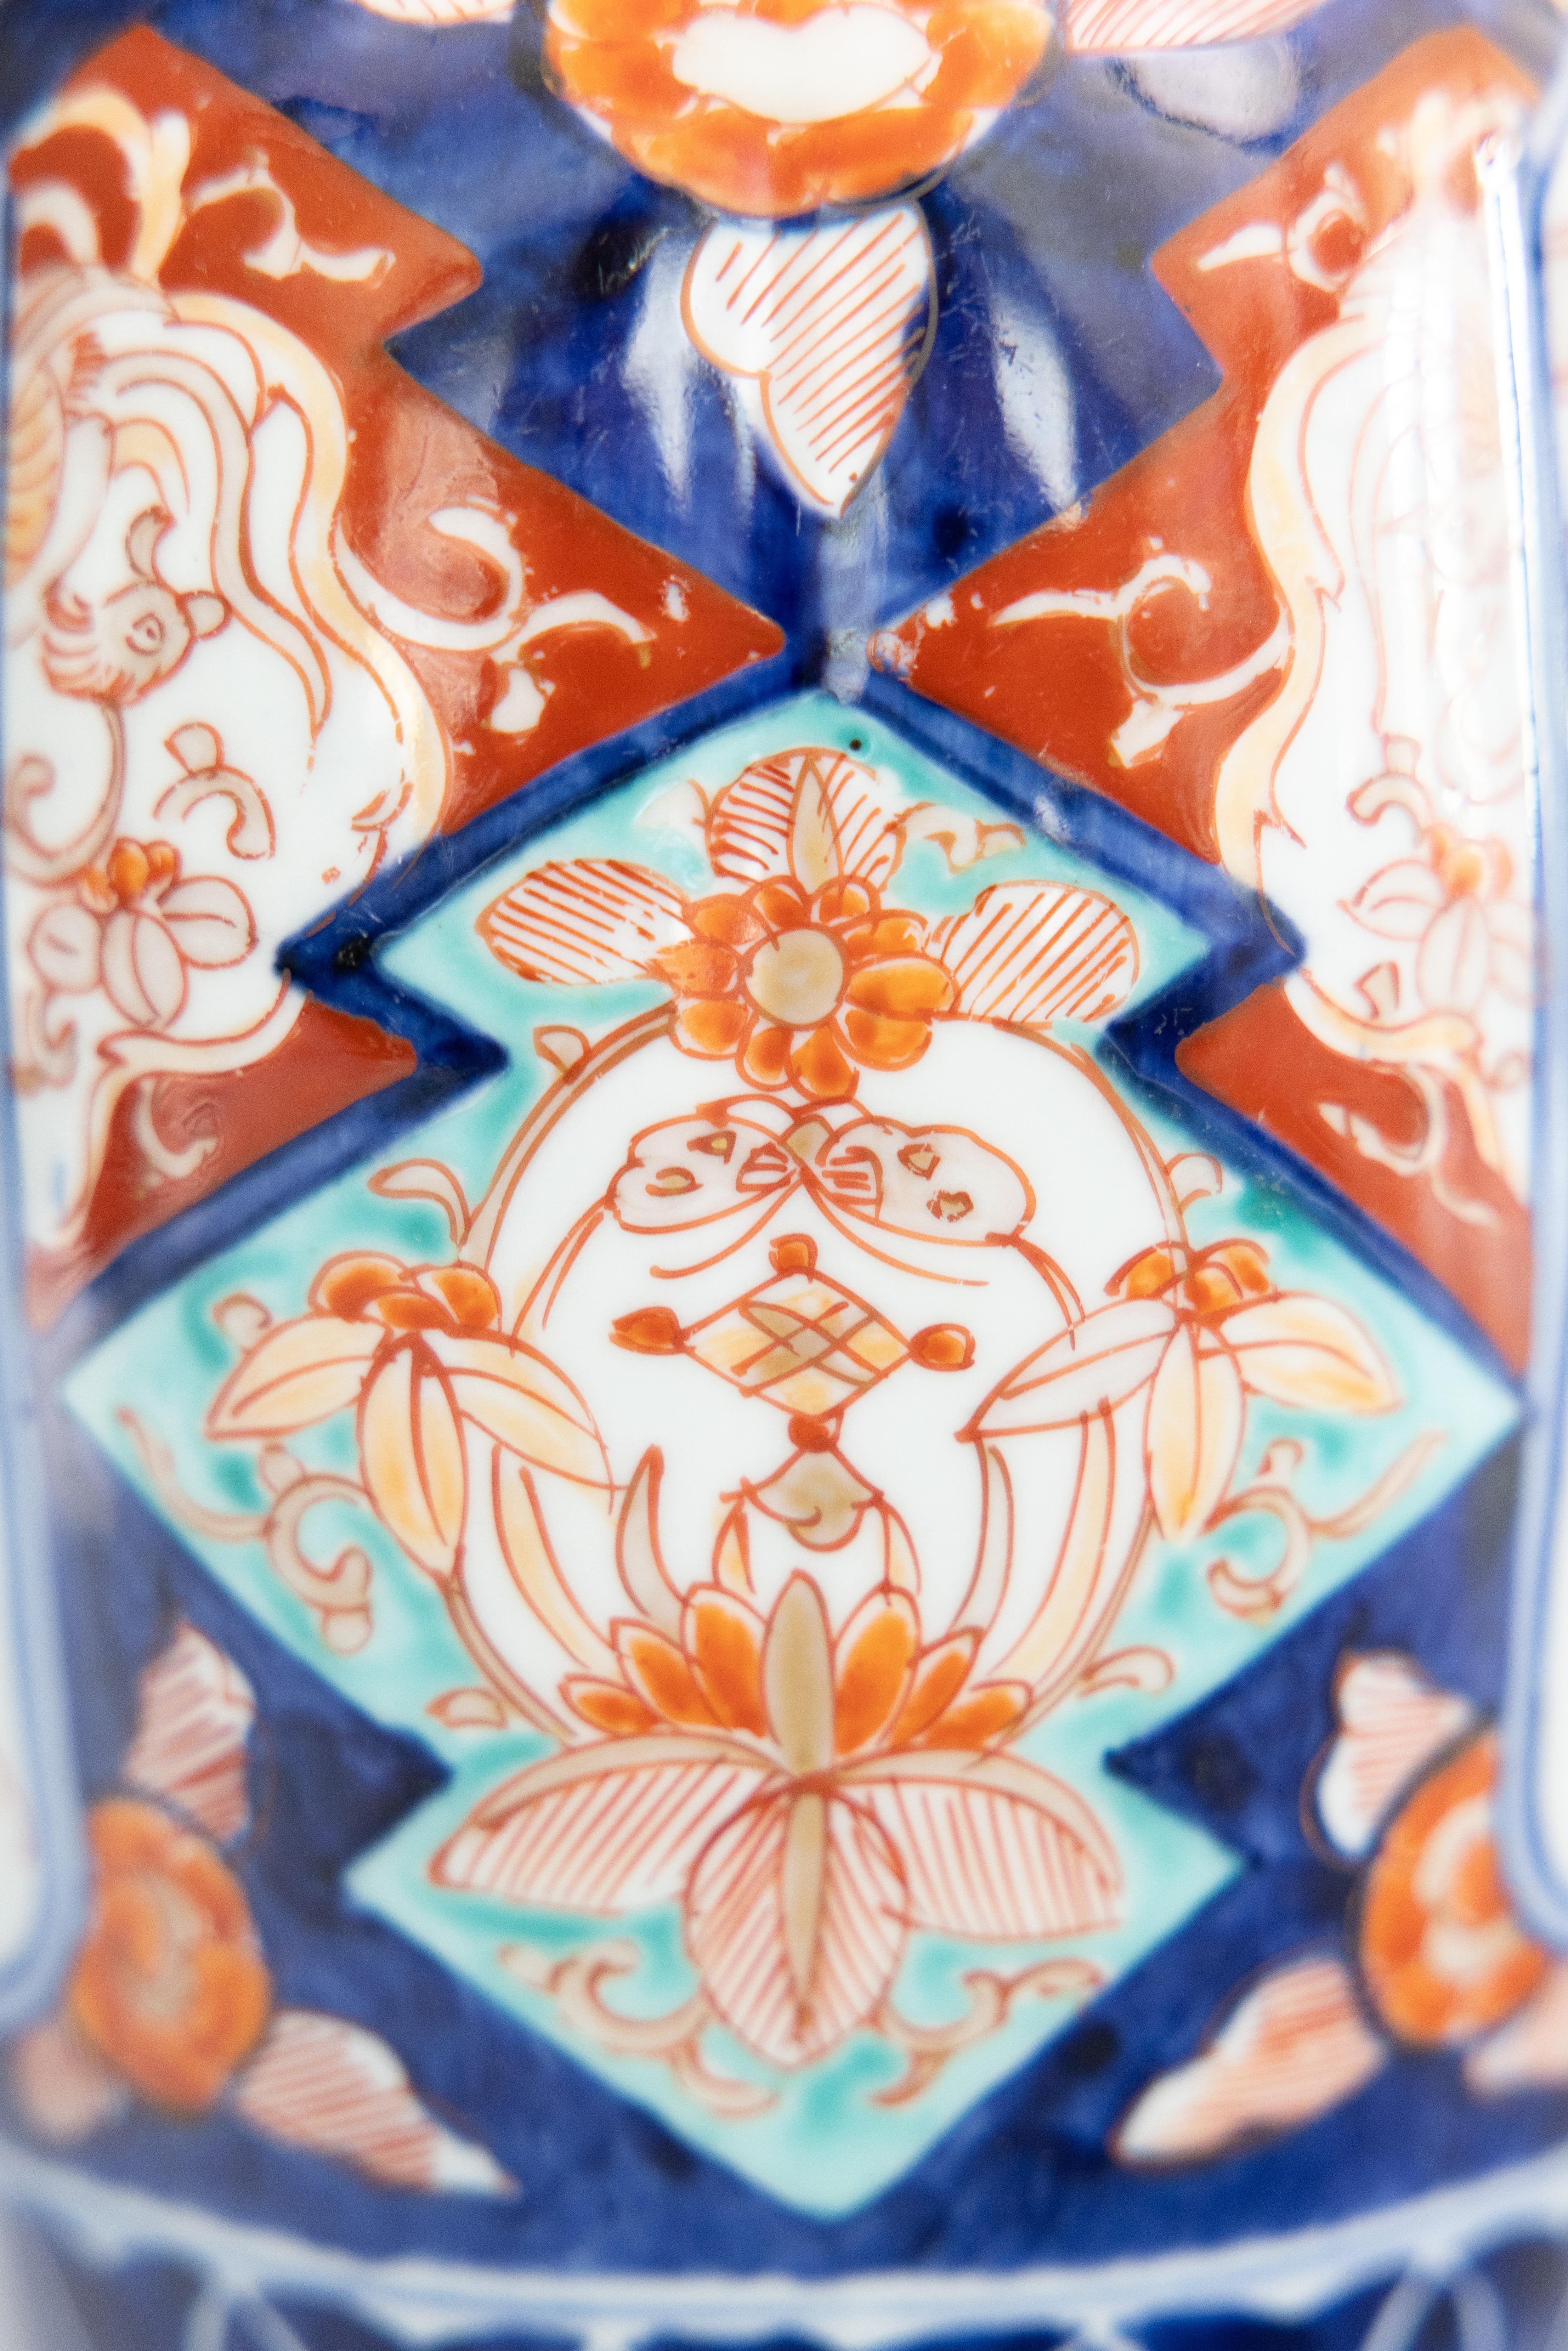 Antique 19th Century Japanese Imari Porcelain Vase In Good Condition For Sale In Pearland, TX